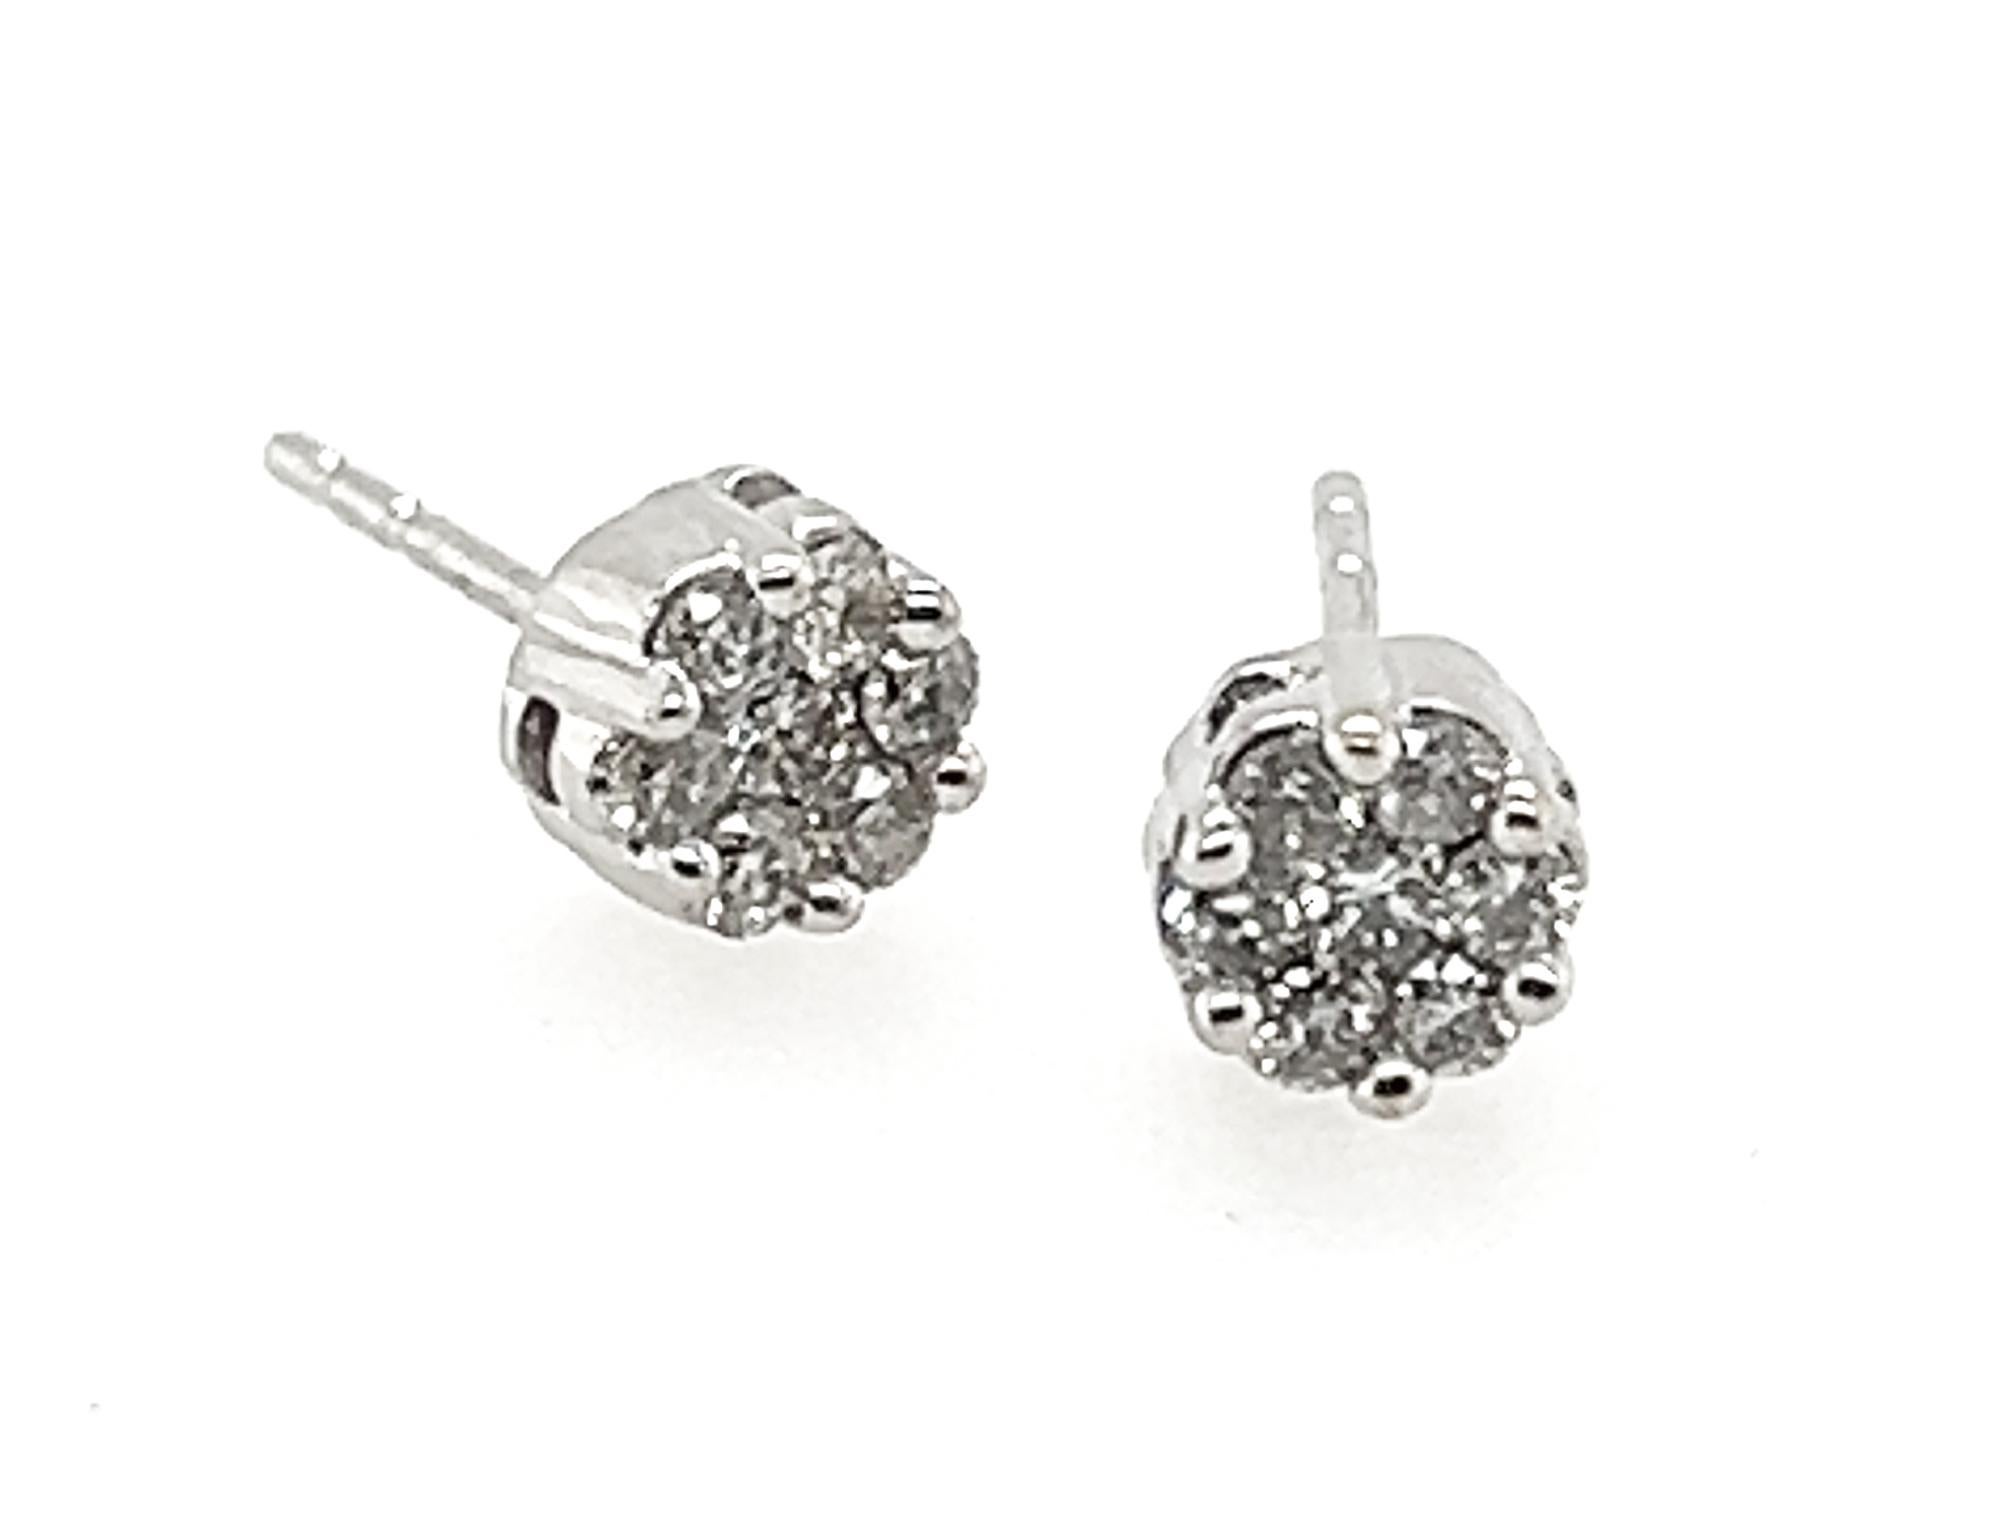 Diamond Stud Earrings .40ct White Gold F-H Cluster 


Features 14 Genuine Mined Natural Round Brilliant Cut Diamonds

Trademarked

100% Natural Mined Diamonds 

.40 Carat Diamond Weight 

Solid 10K White Gold With 14K